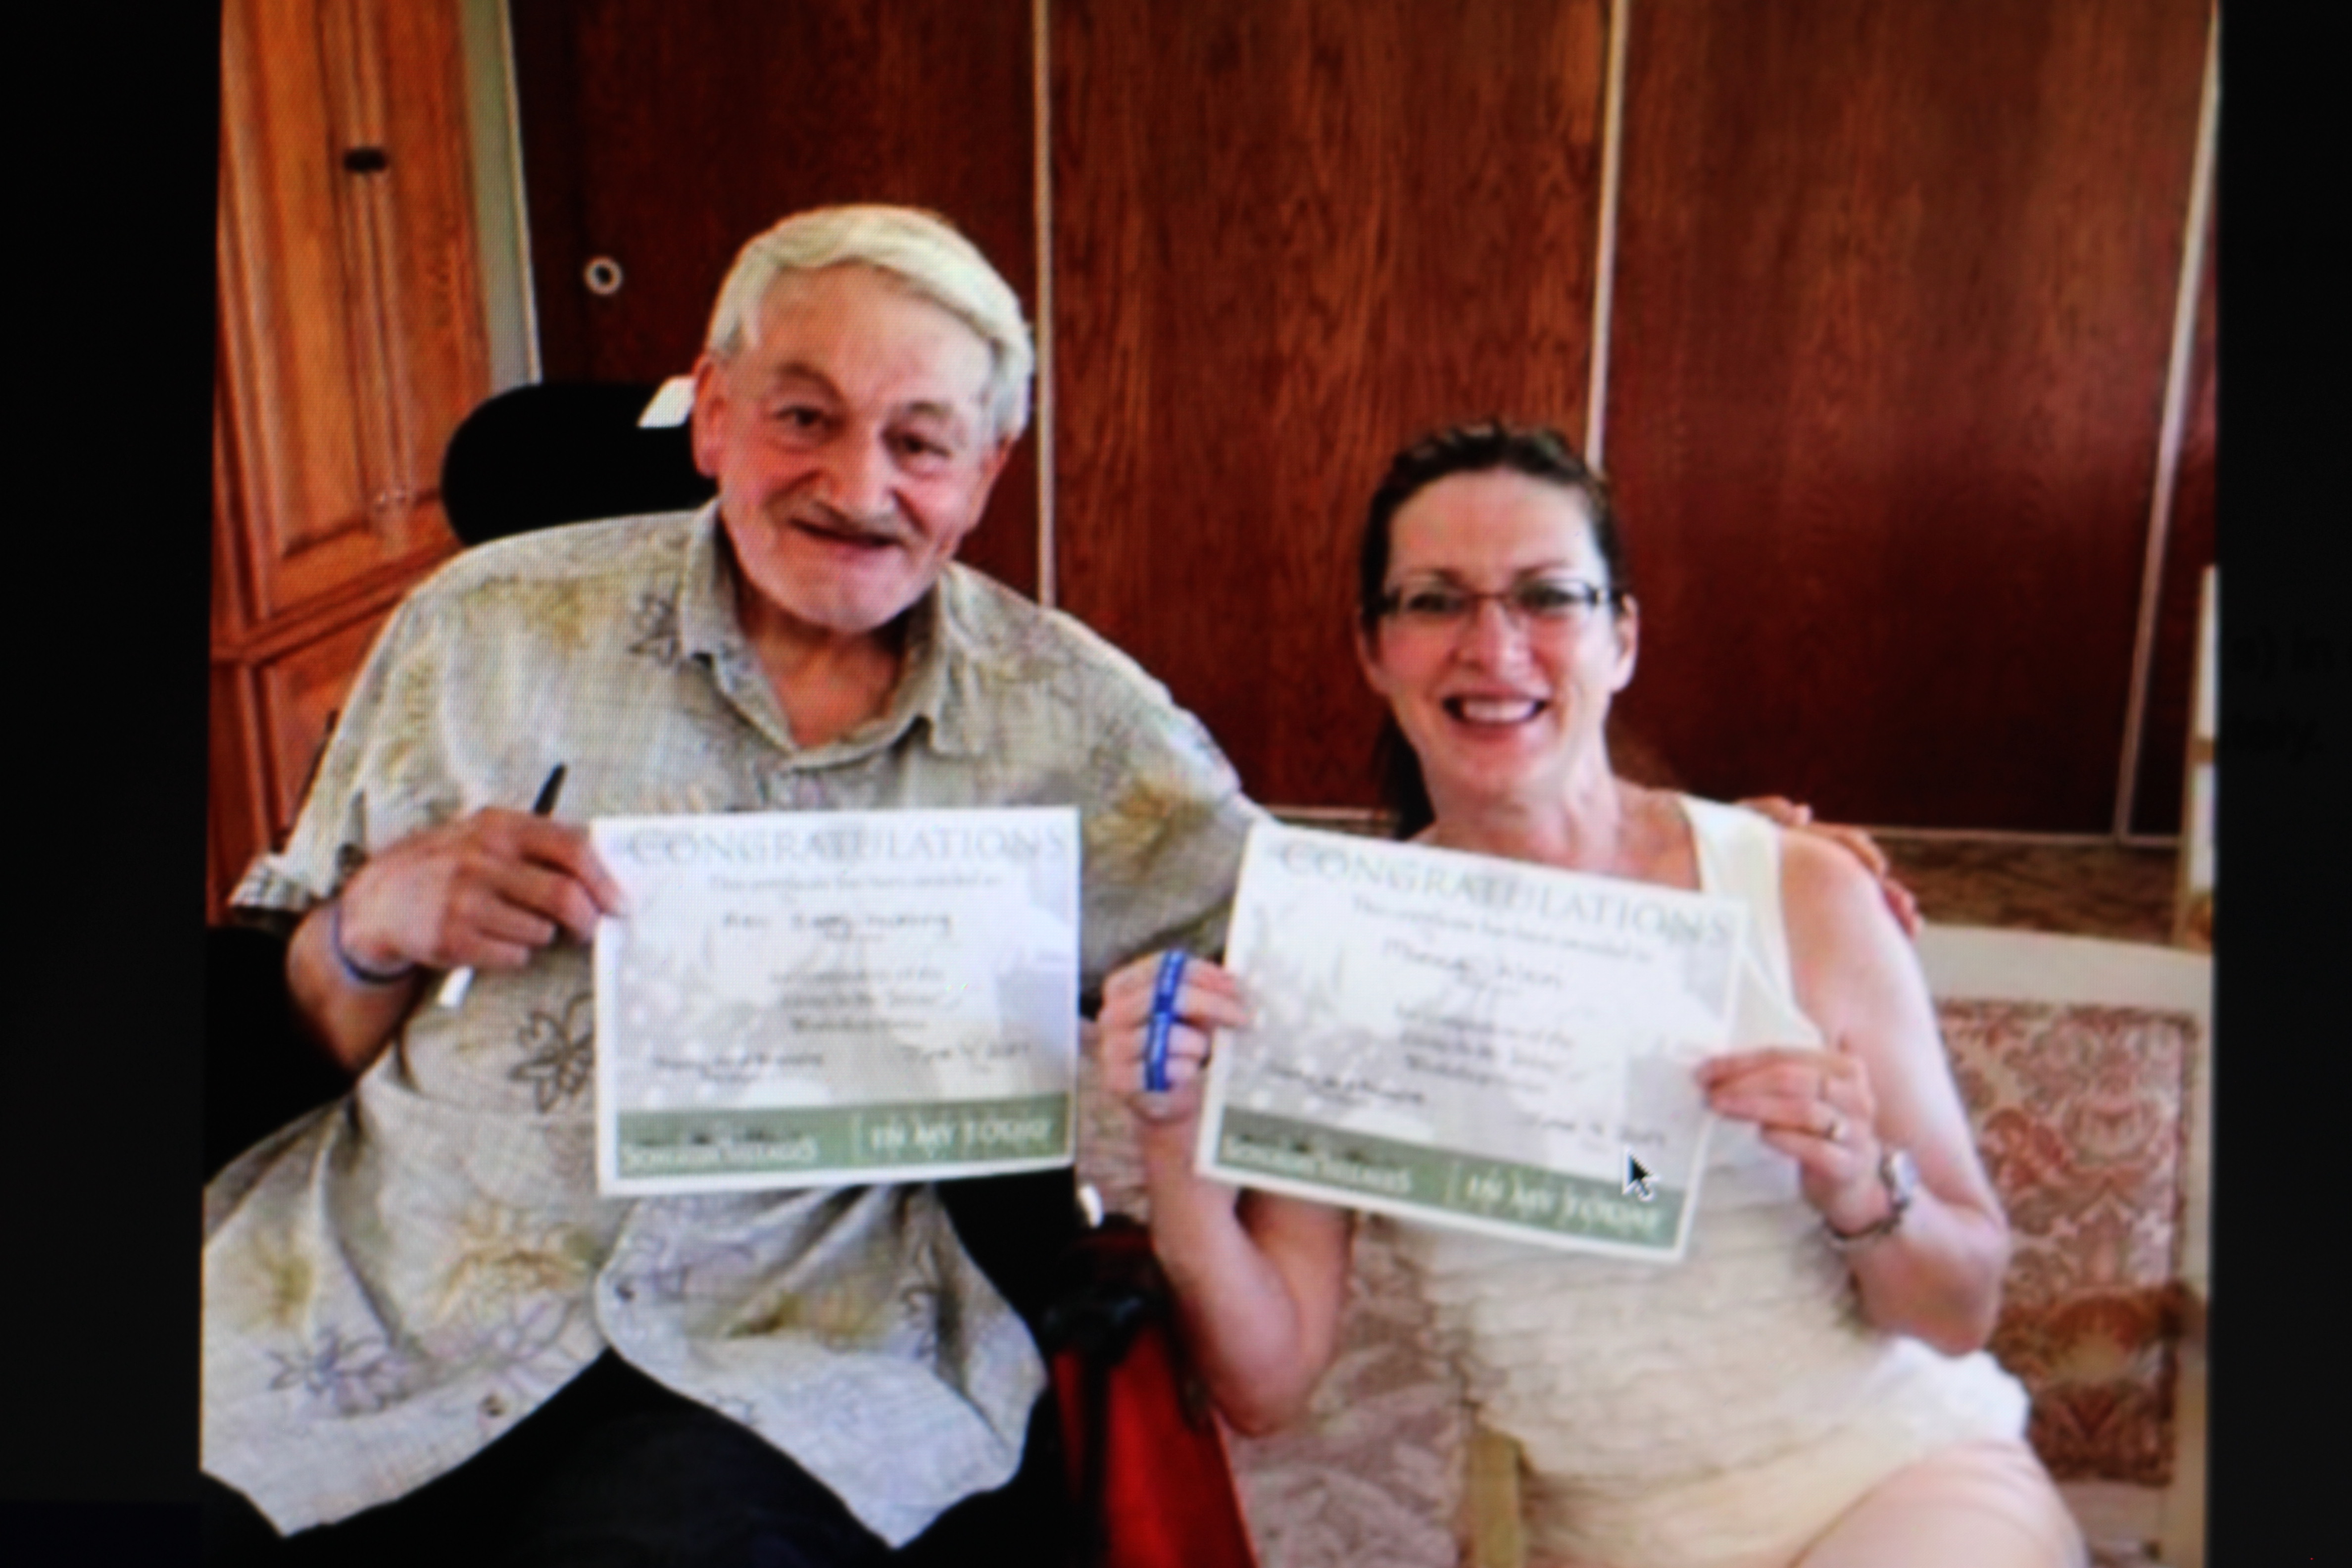 Barry is preparing to get a third certificate in the LIVING the  Dementia Journey education program. 